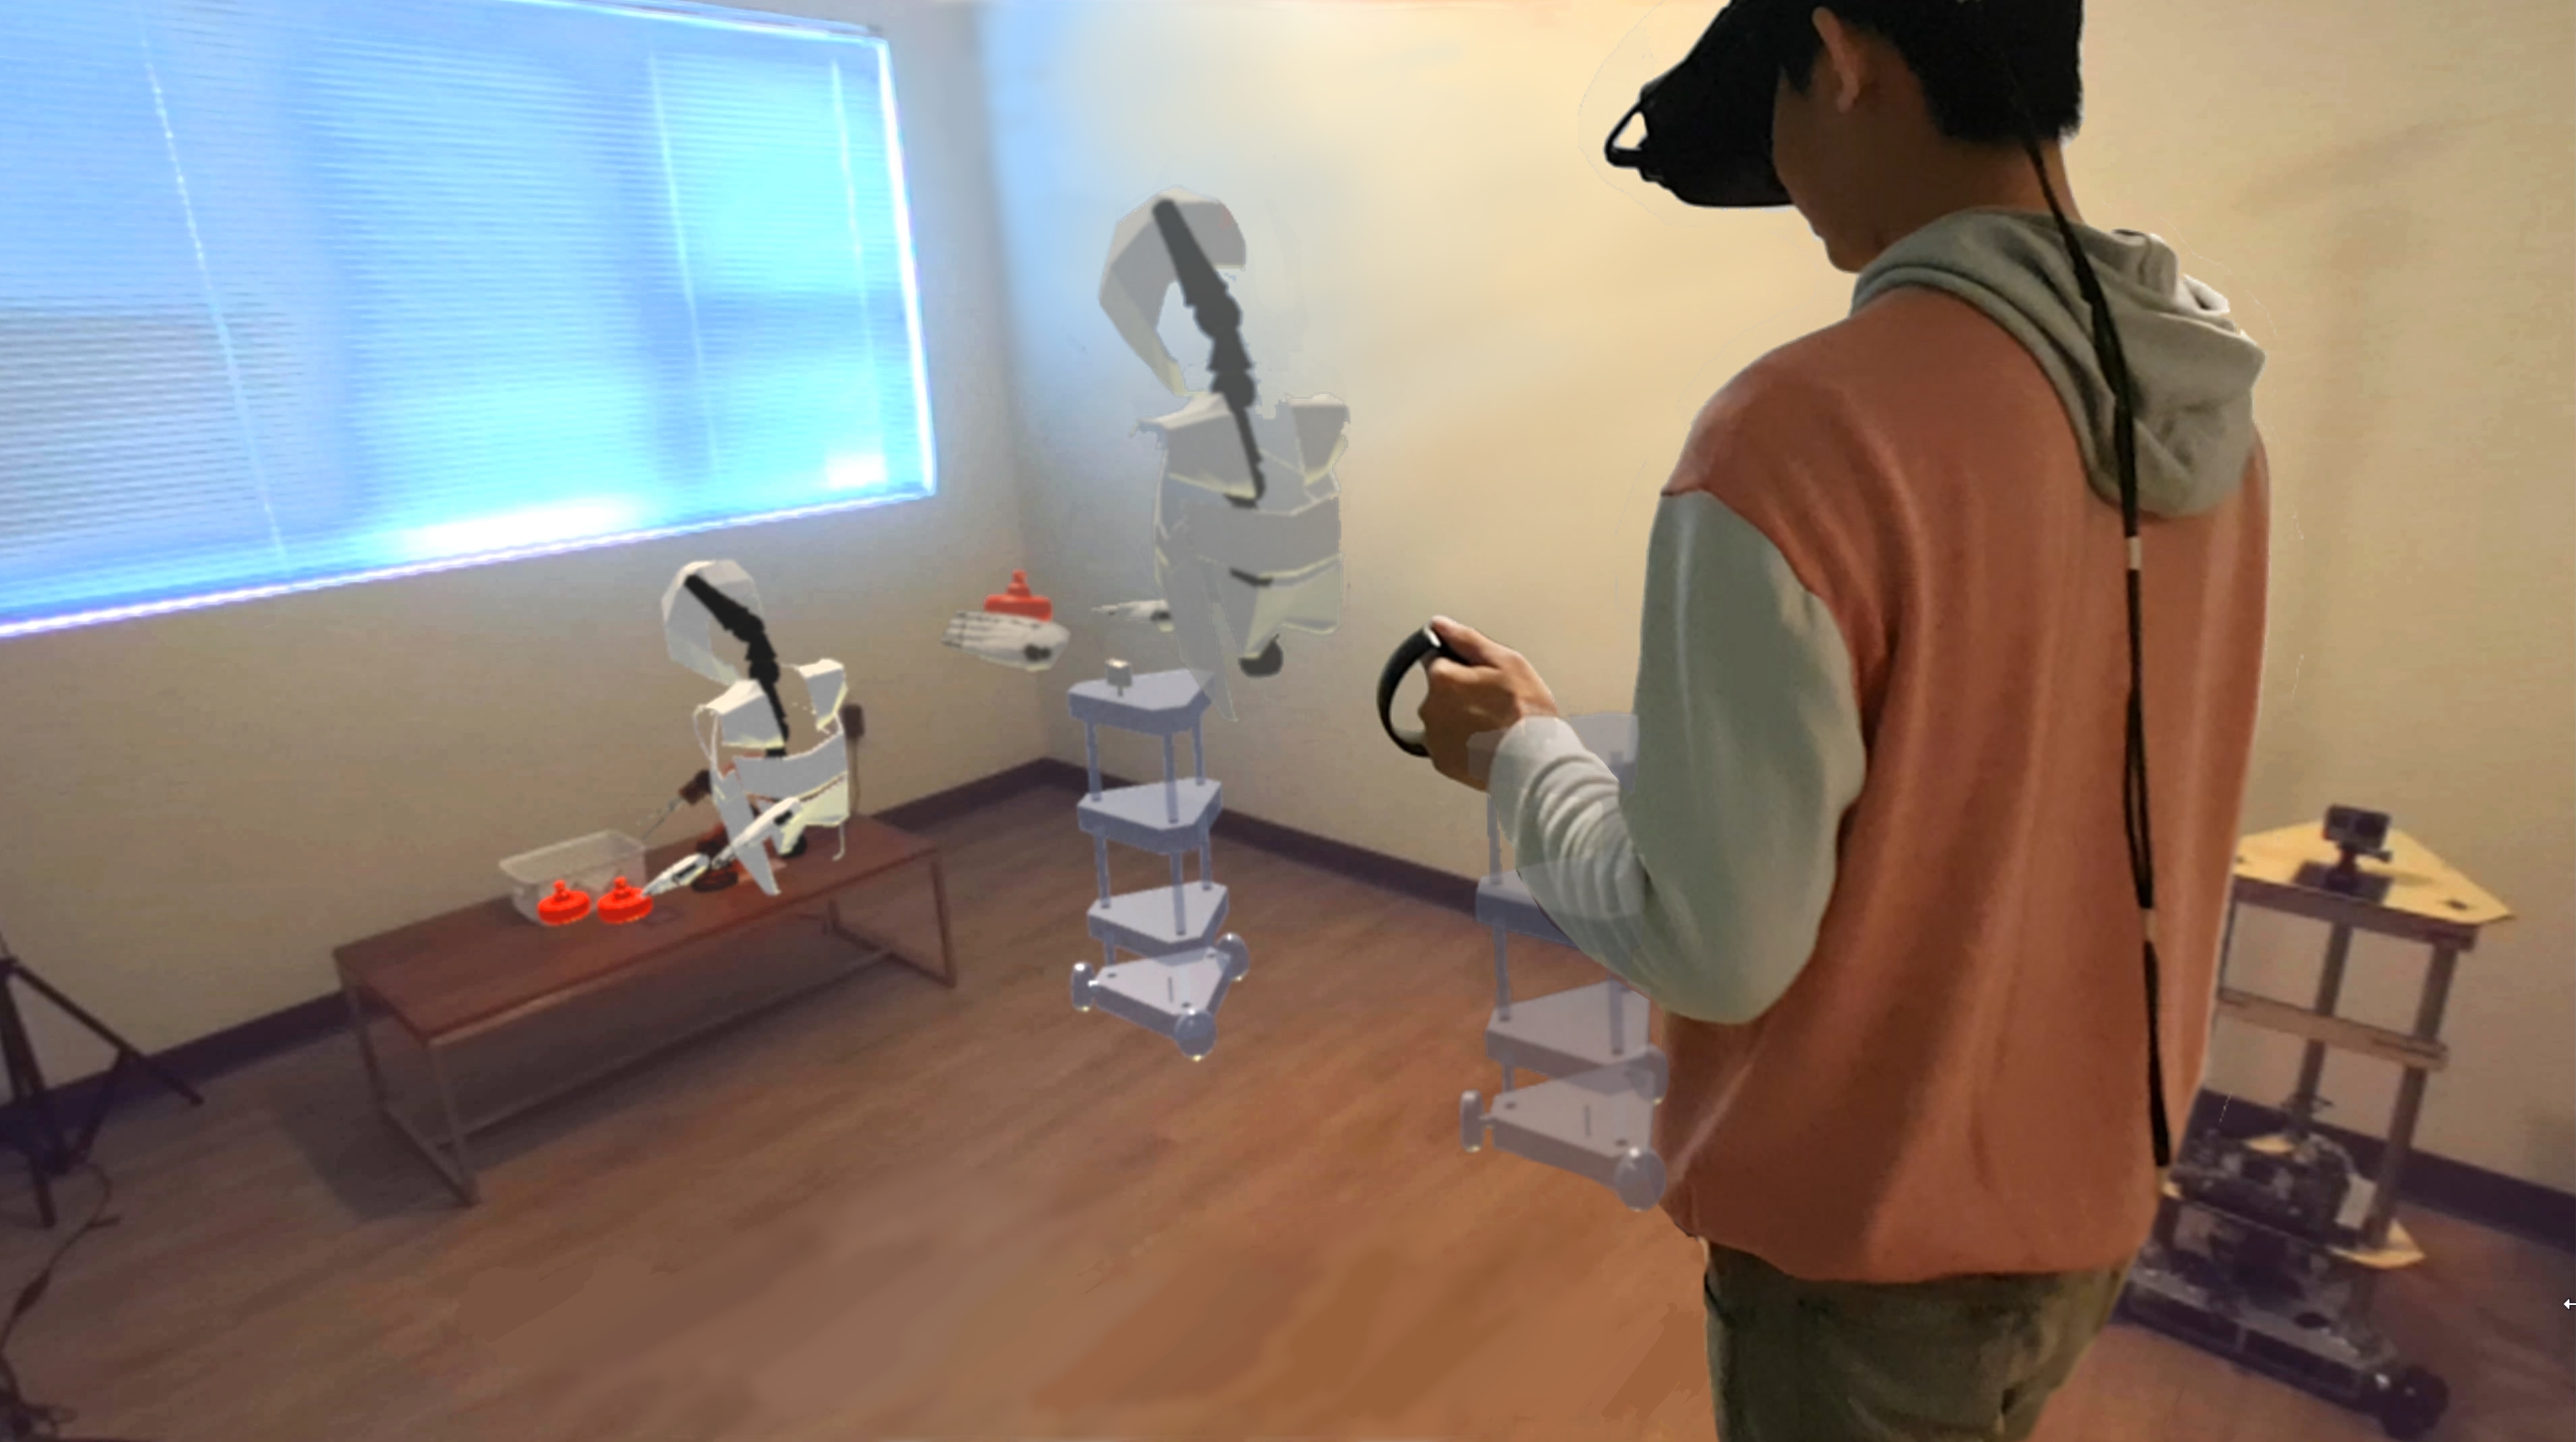 GhostAR: A Time-space Editor for Embodied Authoring of Human-Robot Collaborative Task with Augmented Reality